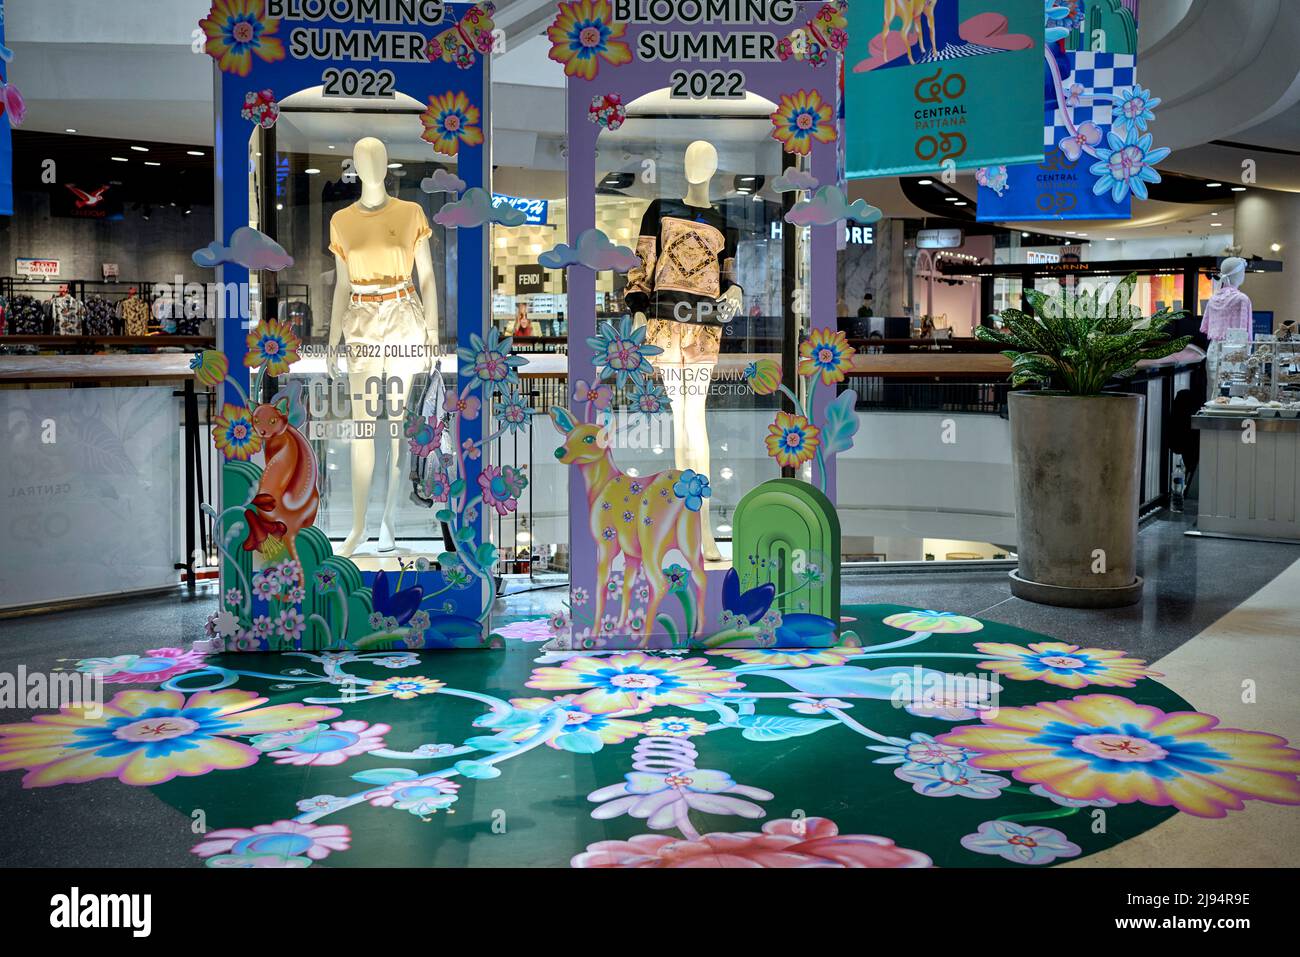 Summer clothes display promoting summertime wear with floor painted flower design of 'Blooming Summer' Thailand Southeast Asia Stock Photo